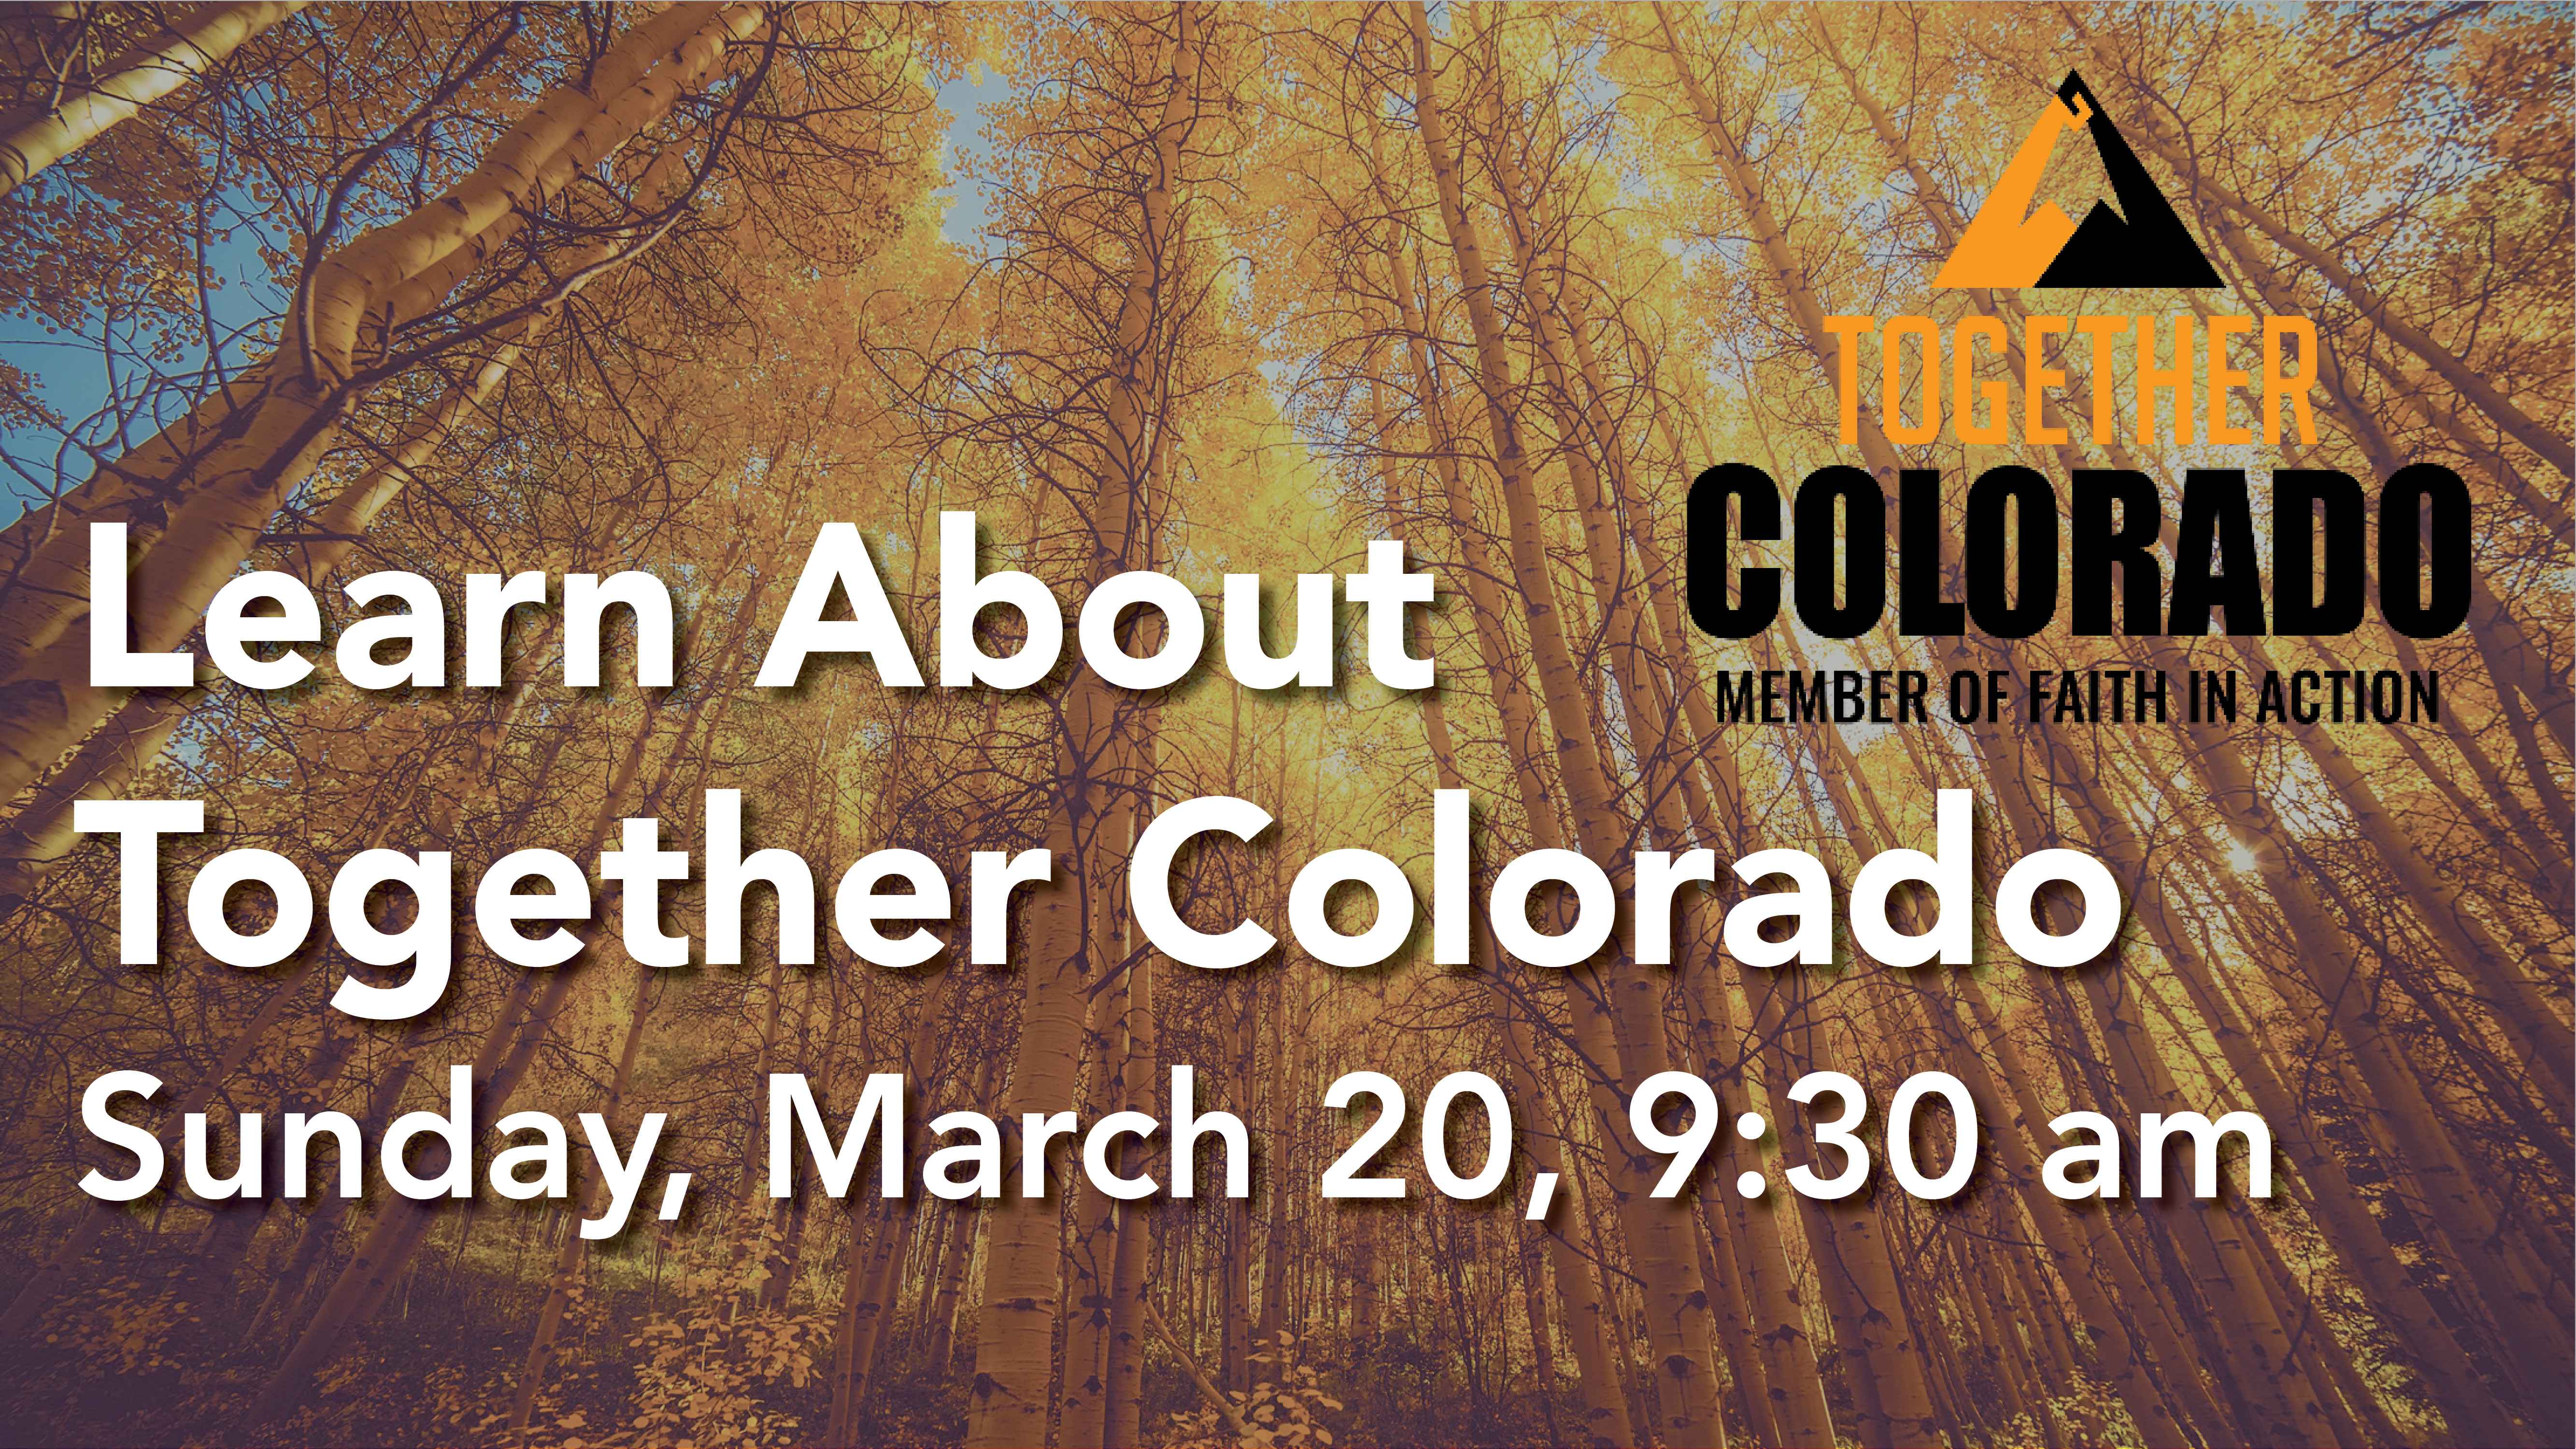 Announcement slide - Learn about Together Colorado